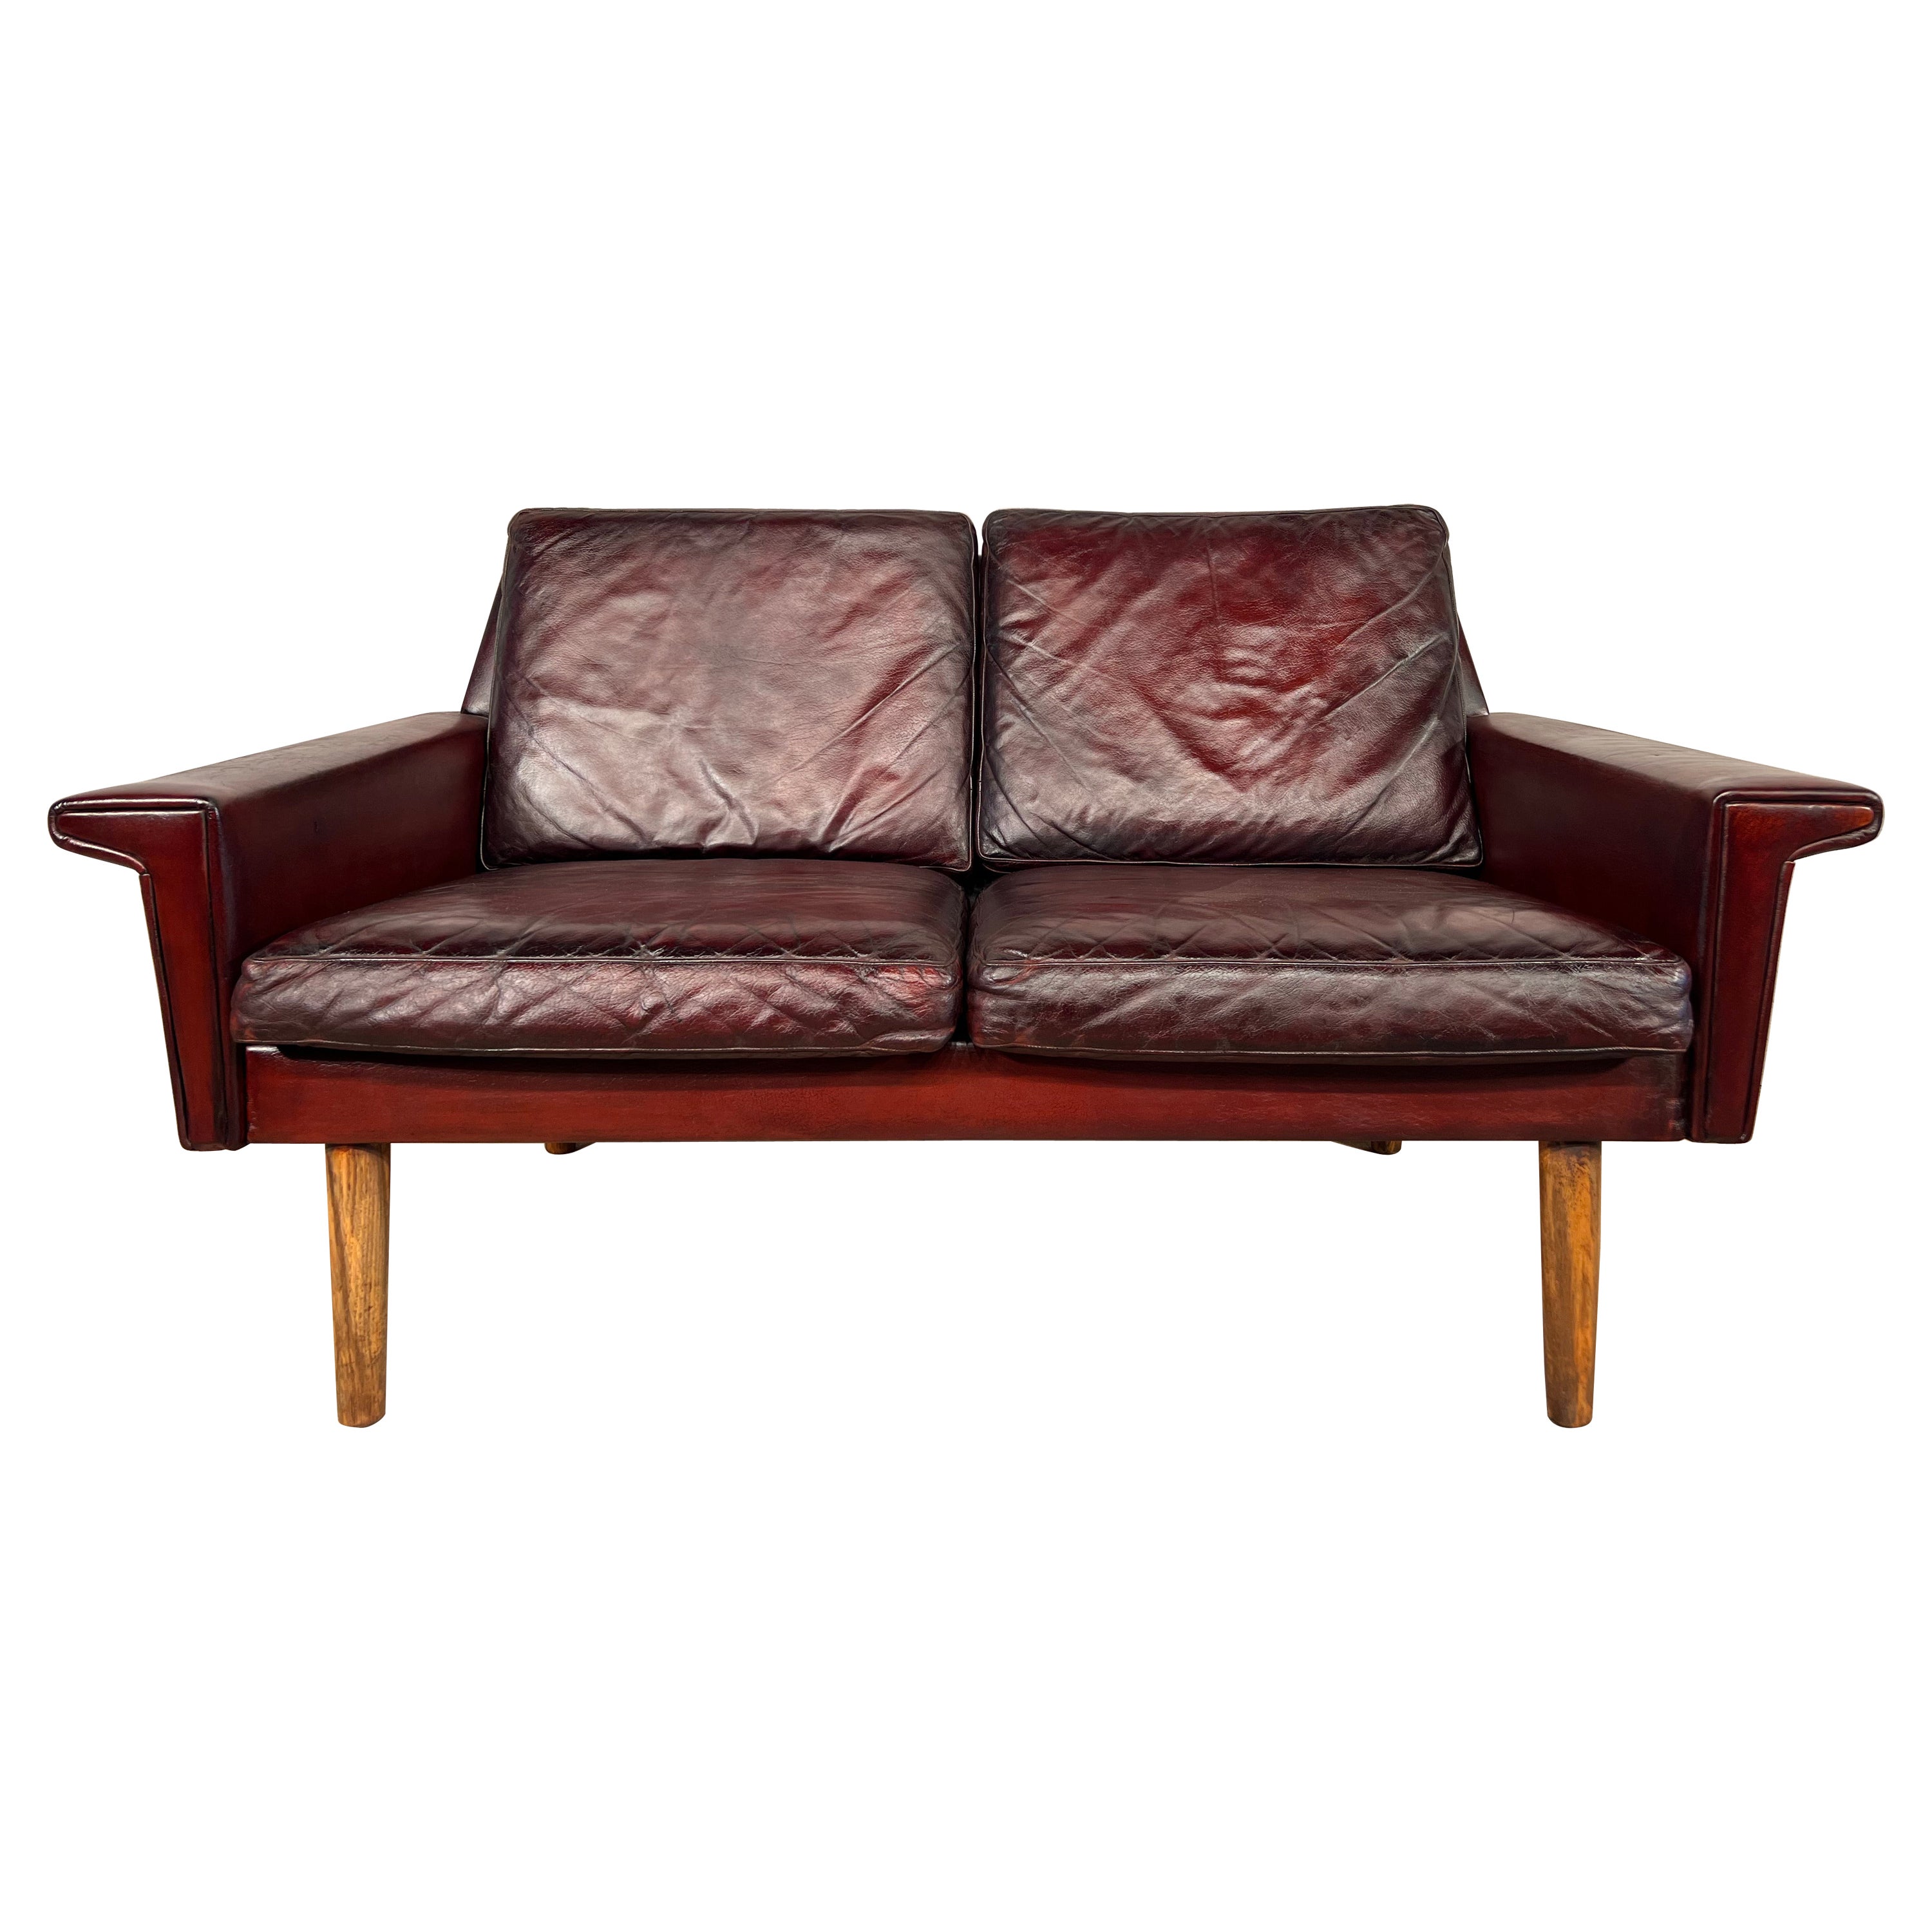 Vintage Svend Skipper Danish 1970 Deep Cherry Leather 2 Seater Leather Sofa #549 For Sale